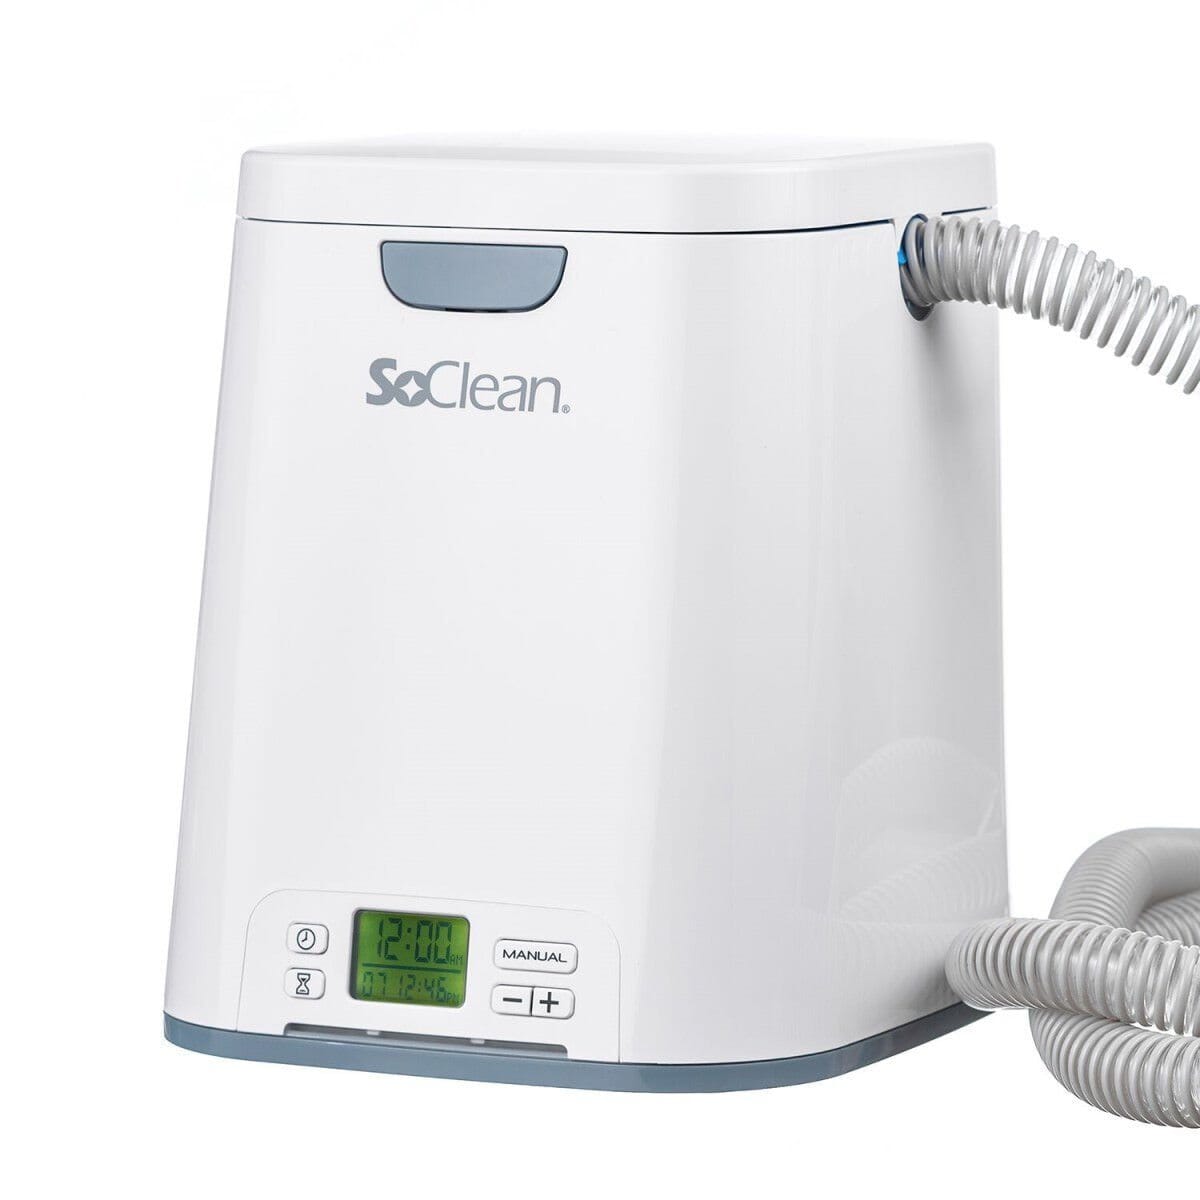 Image of SoClean 2 CPAP Cleaner and Sanitizer